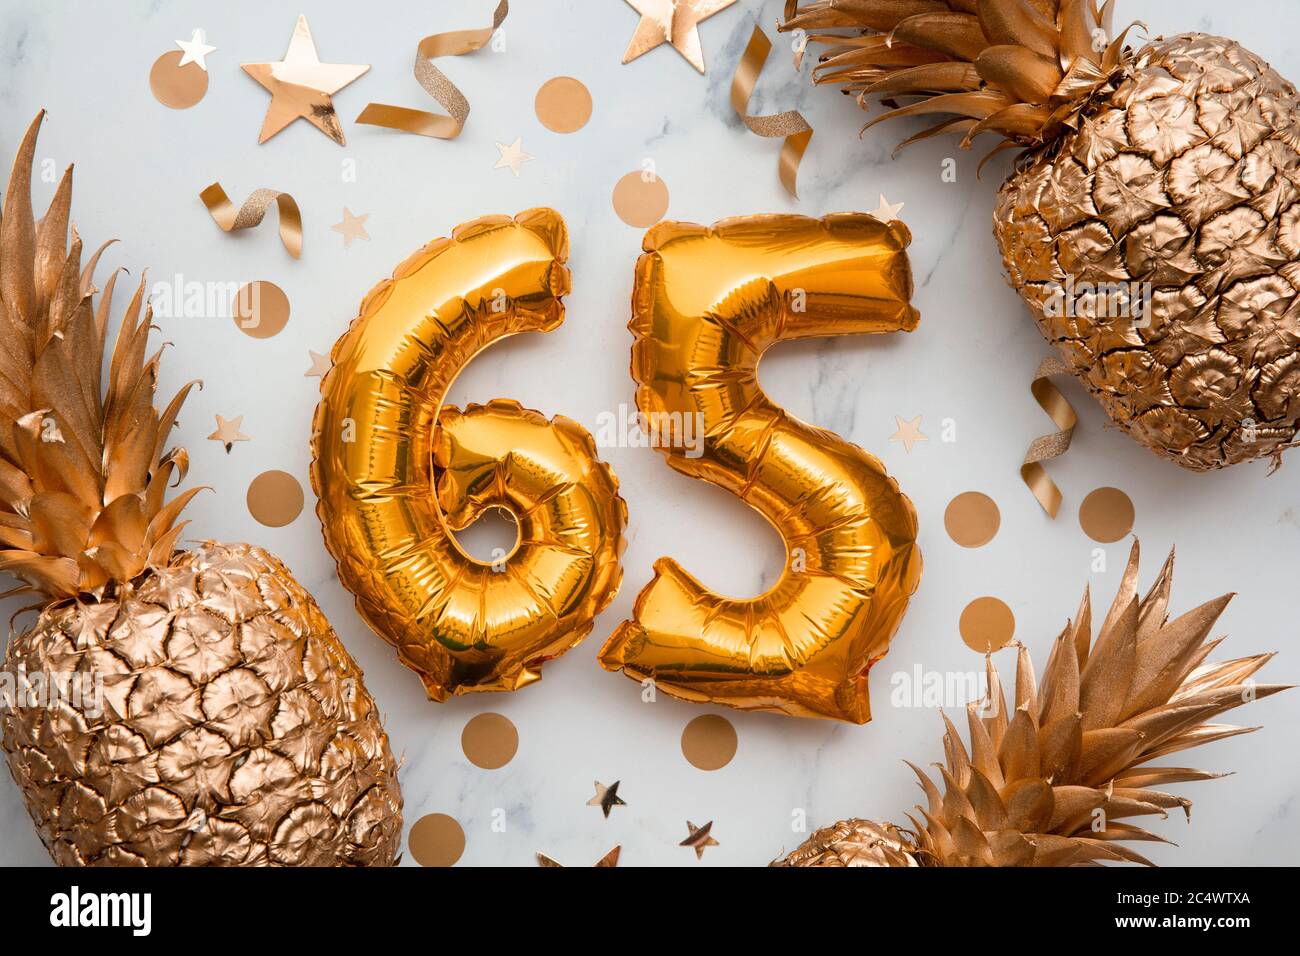 65th birthday celebration card with gold foil balloons and golden pineapples Stock Photo